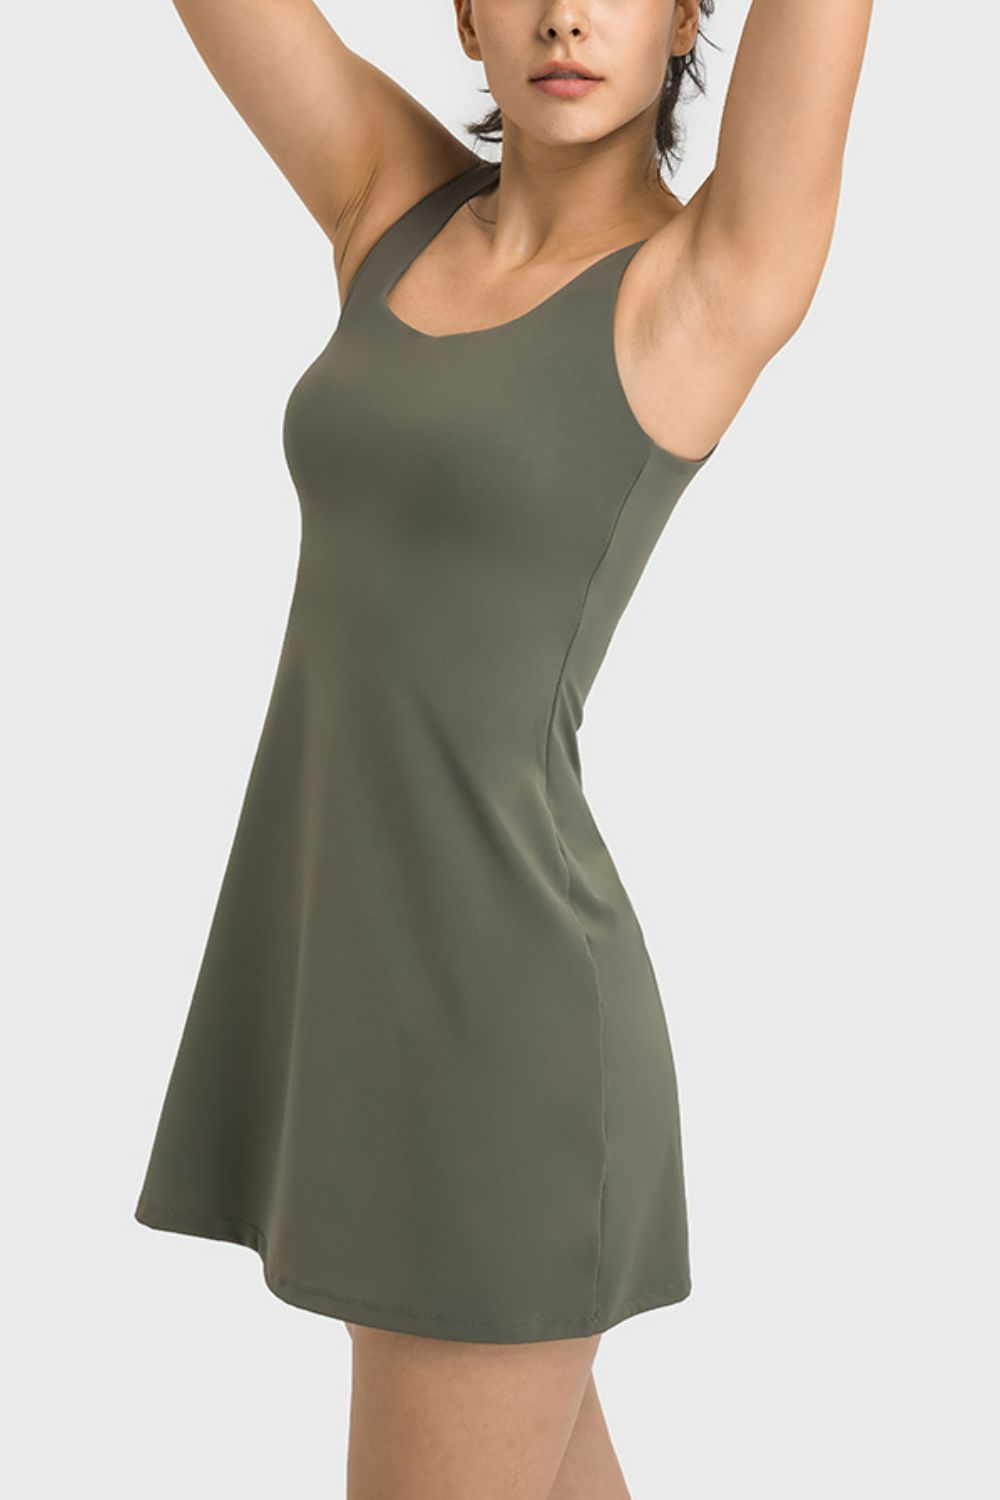 Sports Tank Dress with Built In Shorts